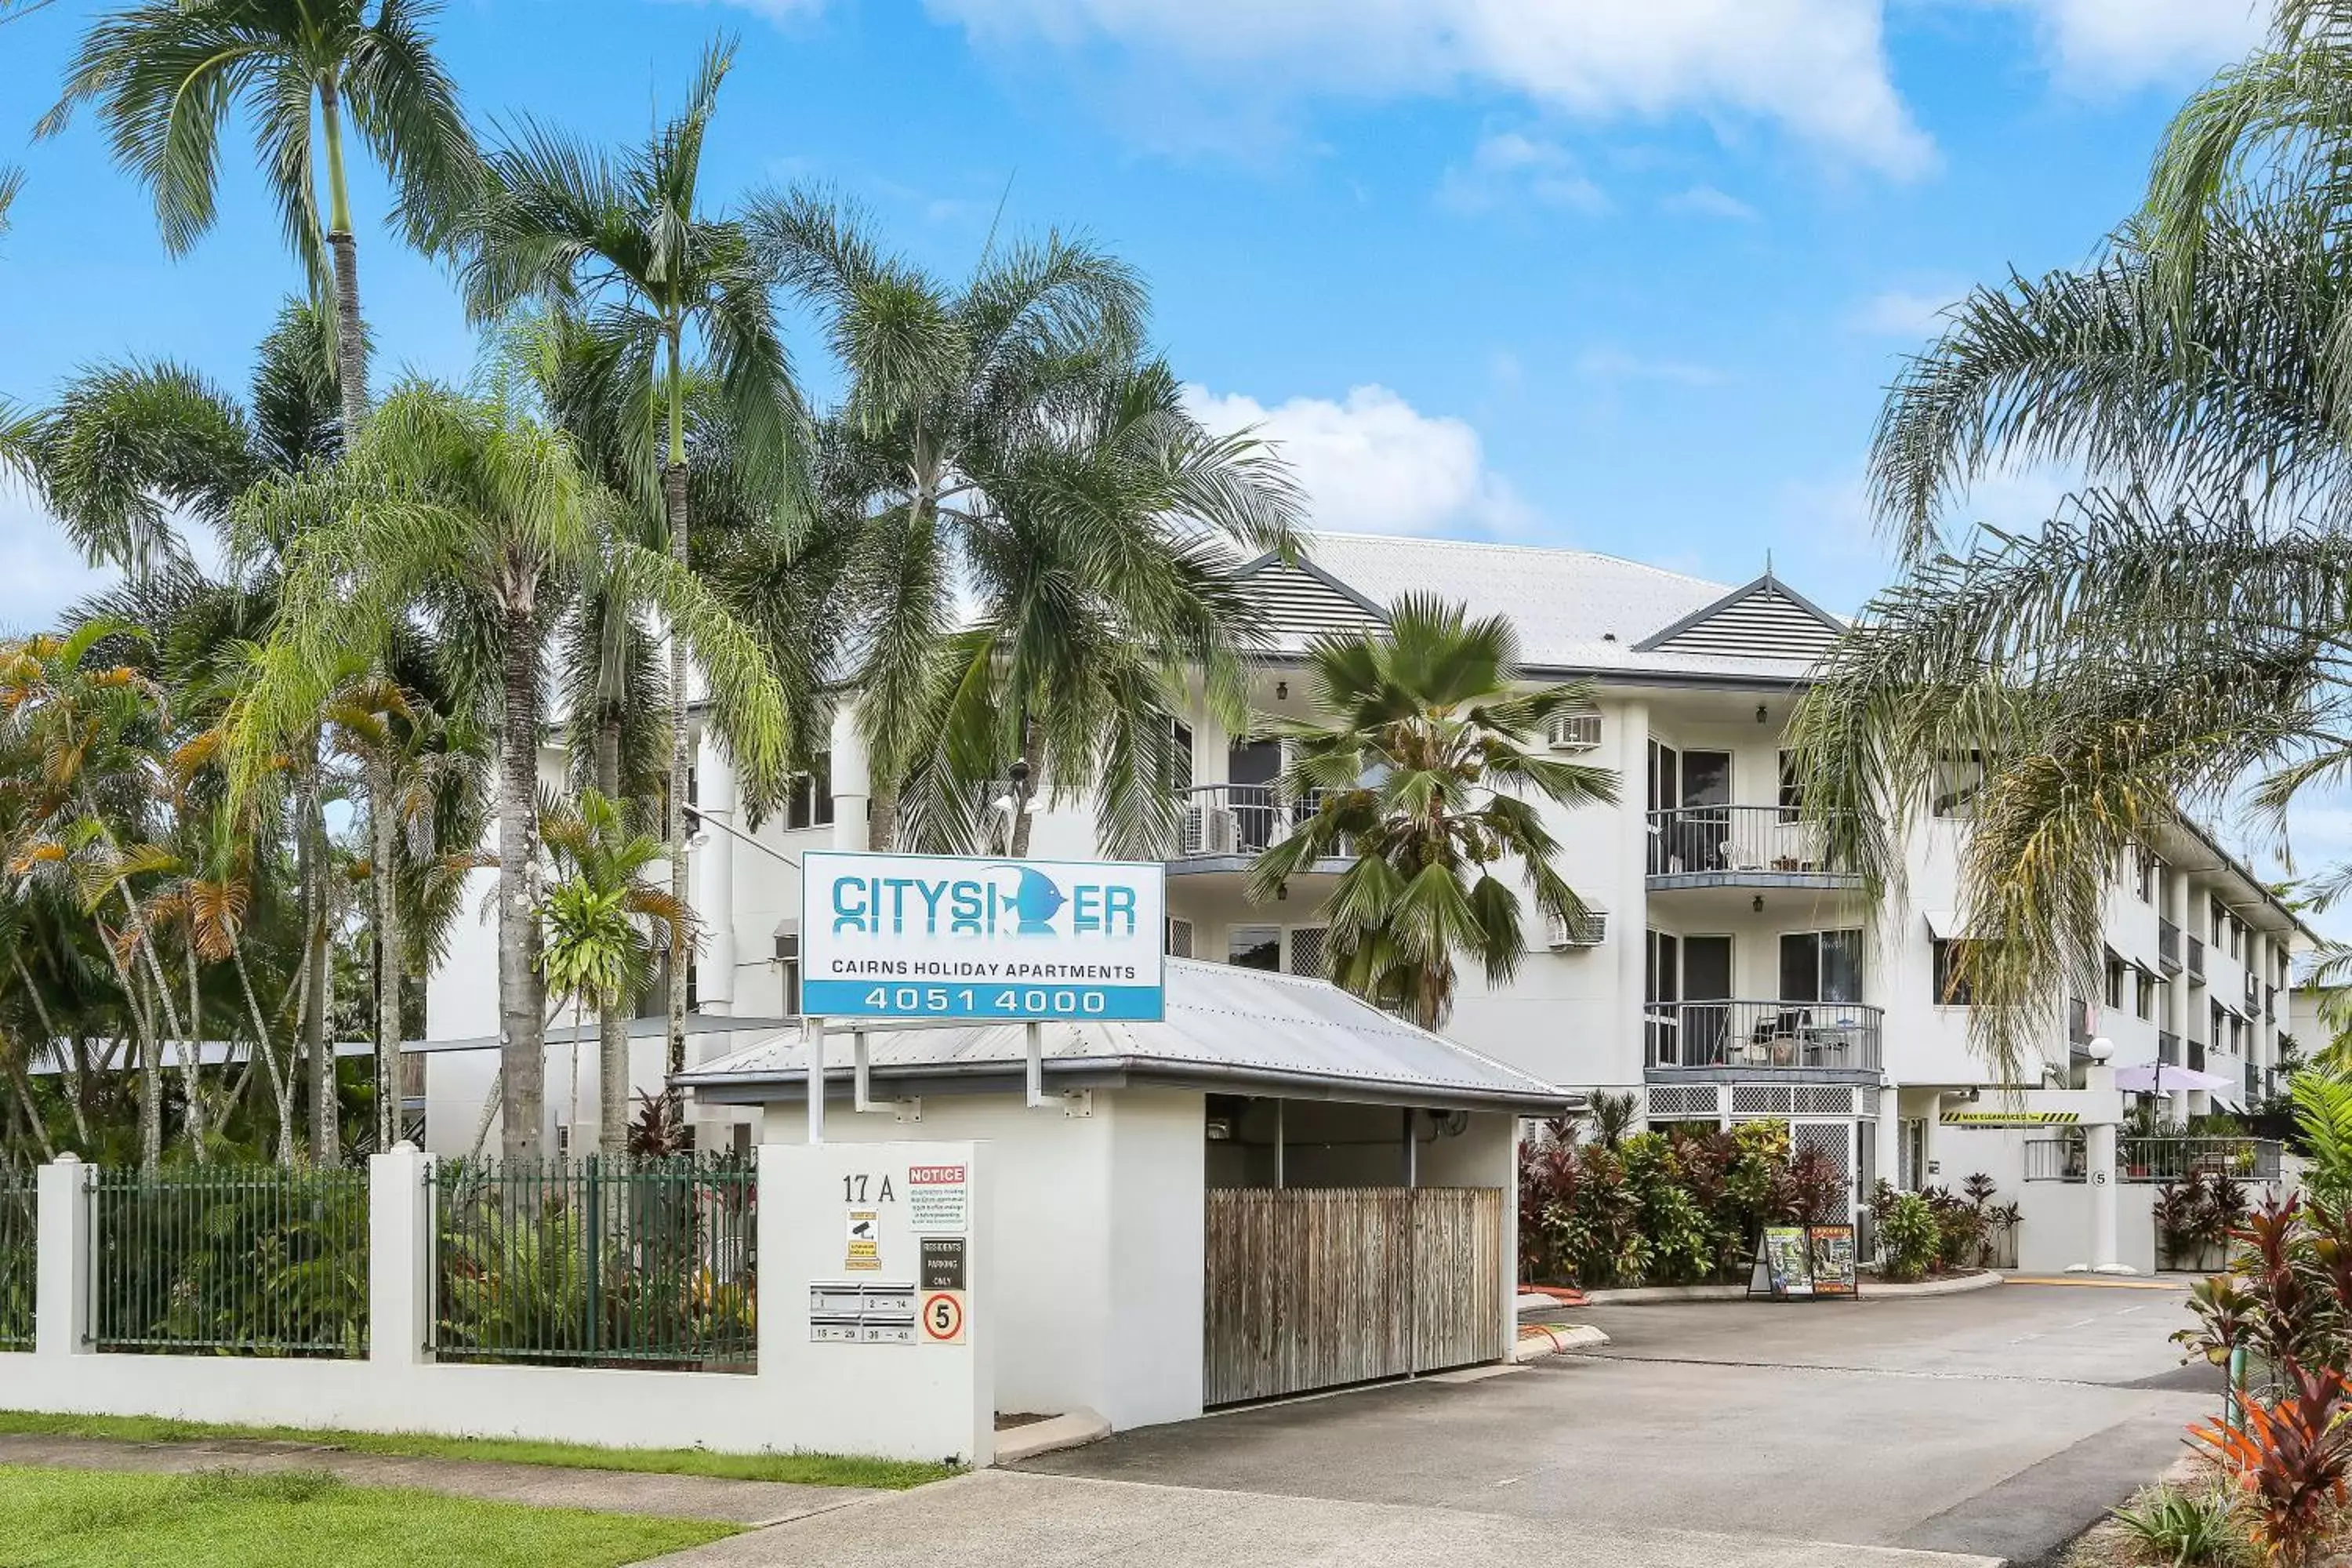 Property Building in Citysider Cairns Holiday Apartments